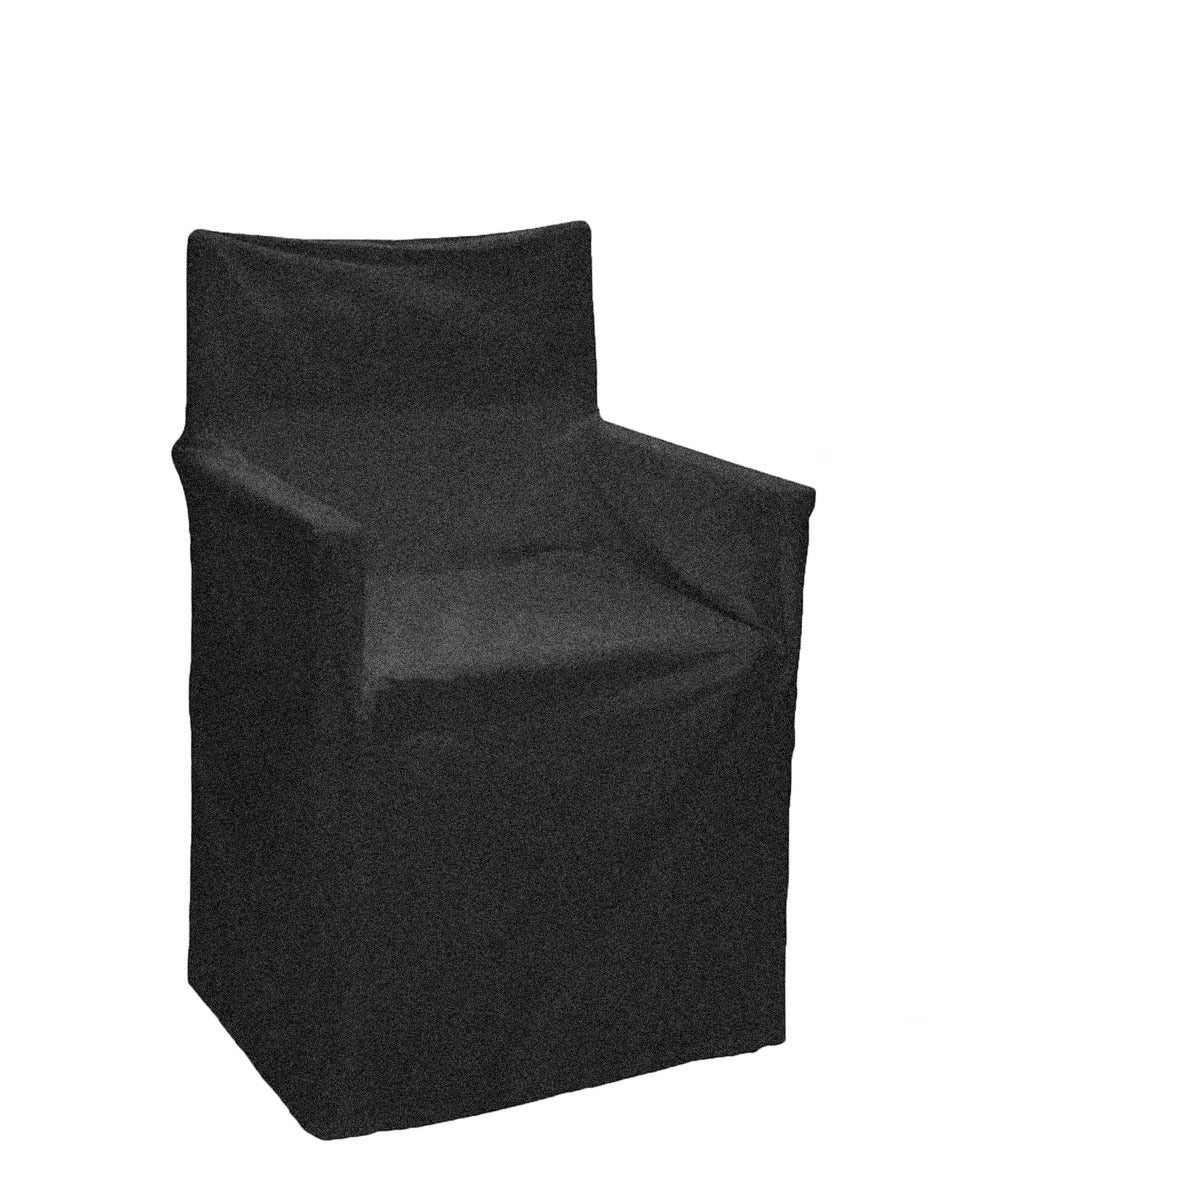 Cotton Director Chair Cover Black